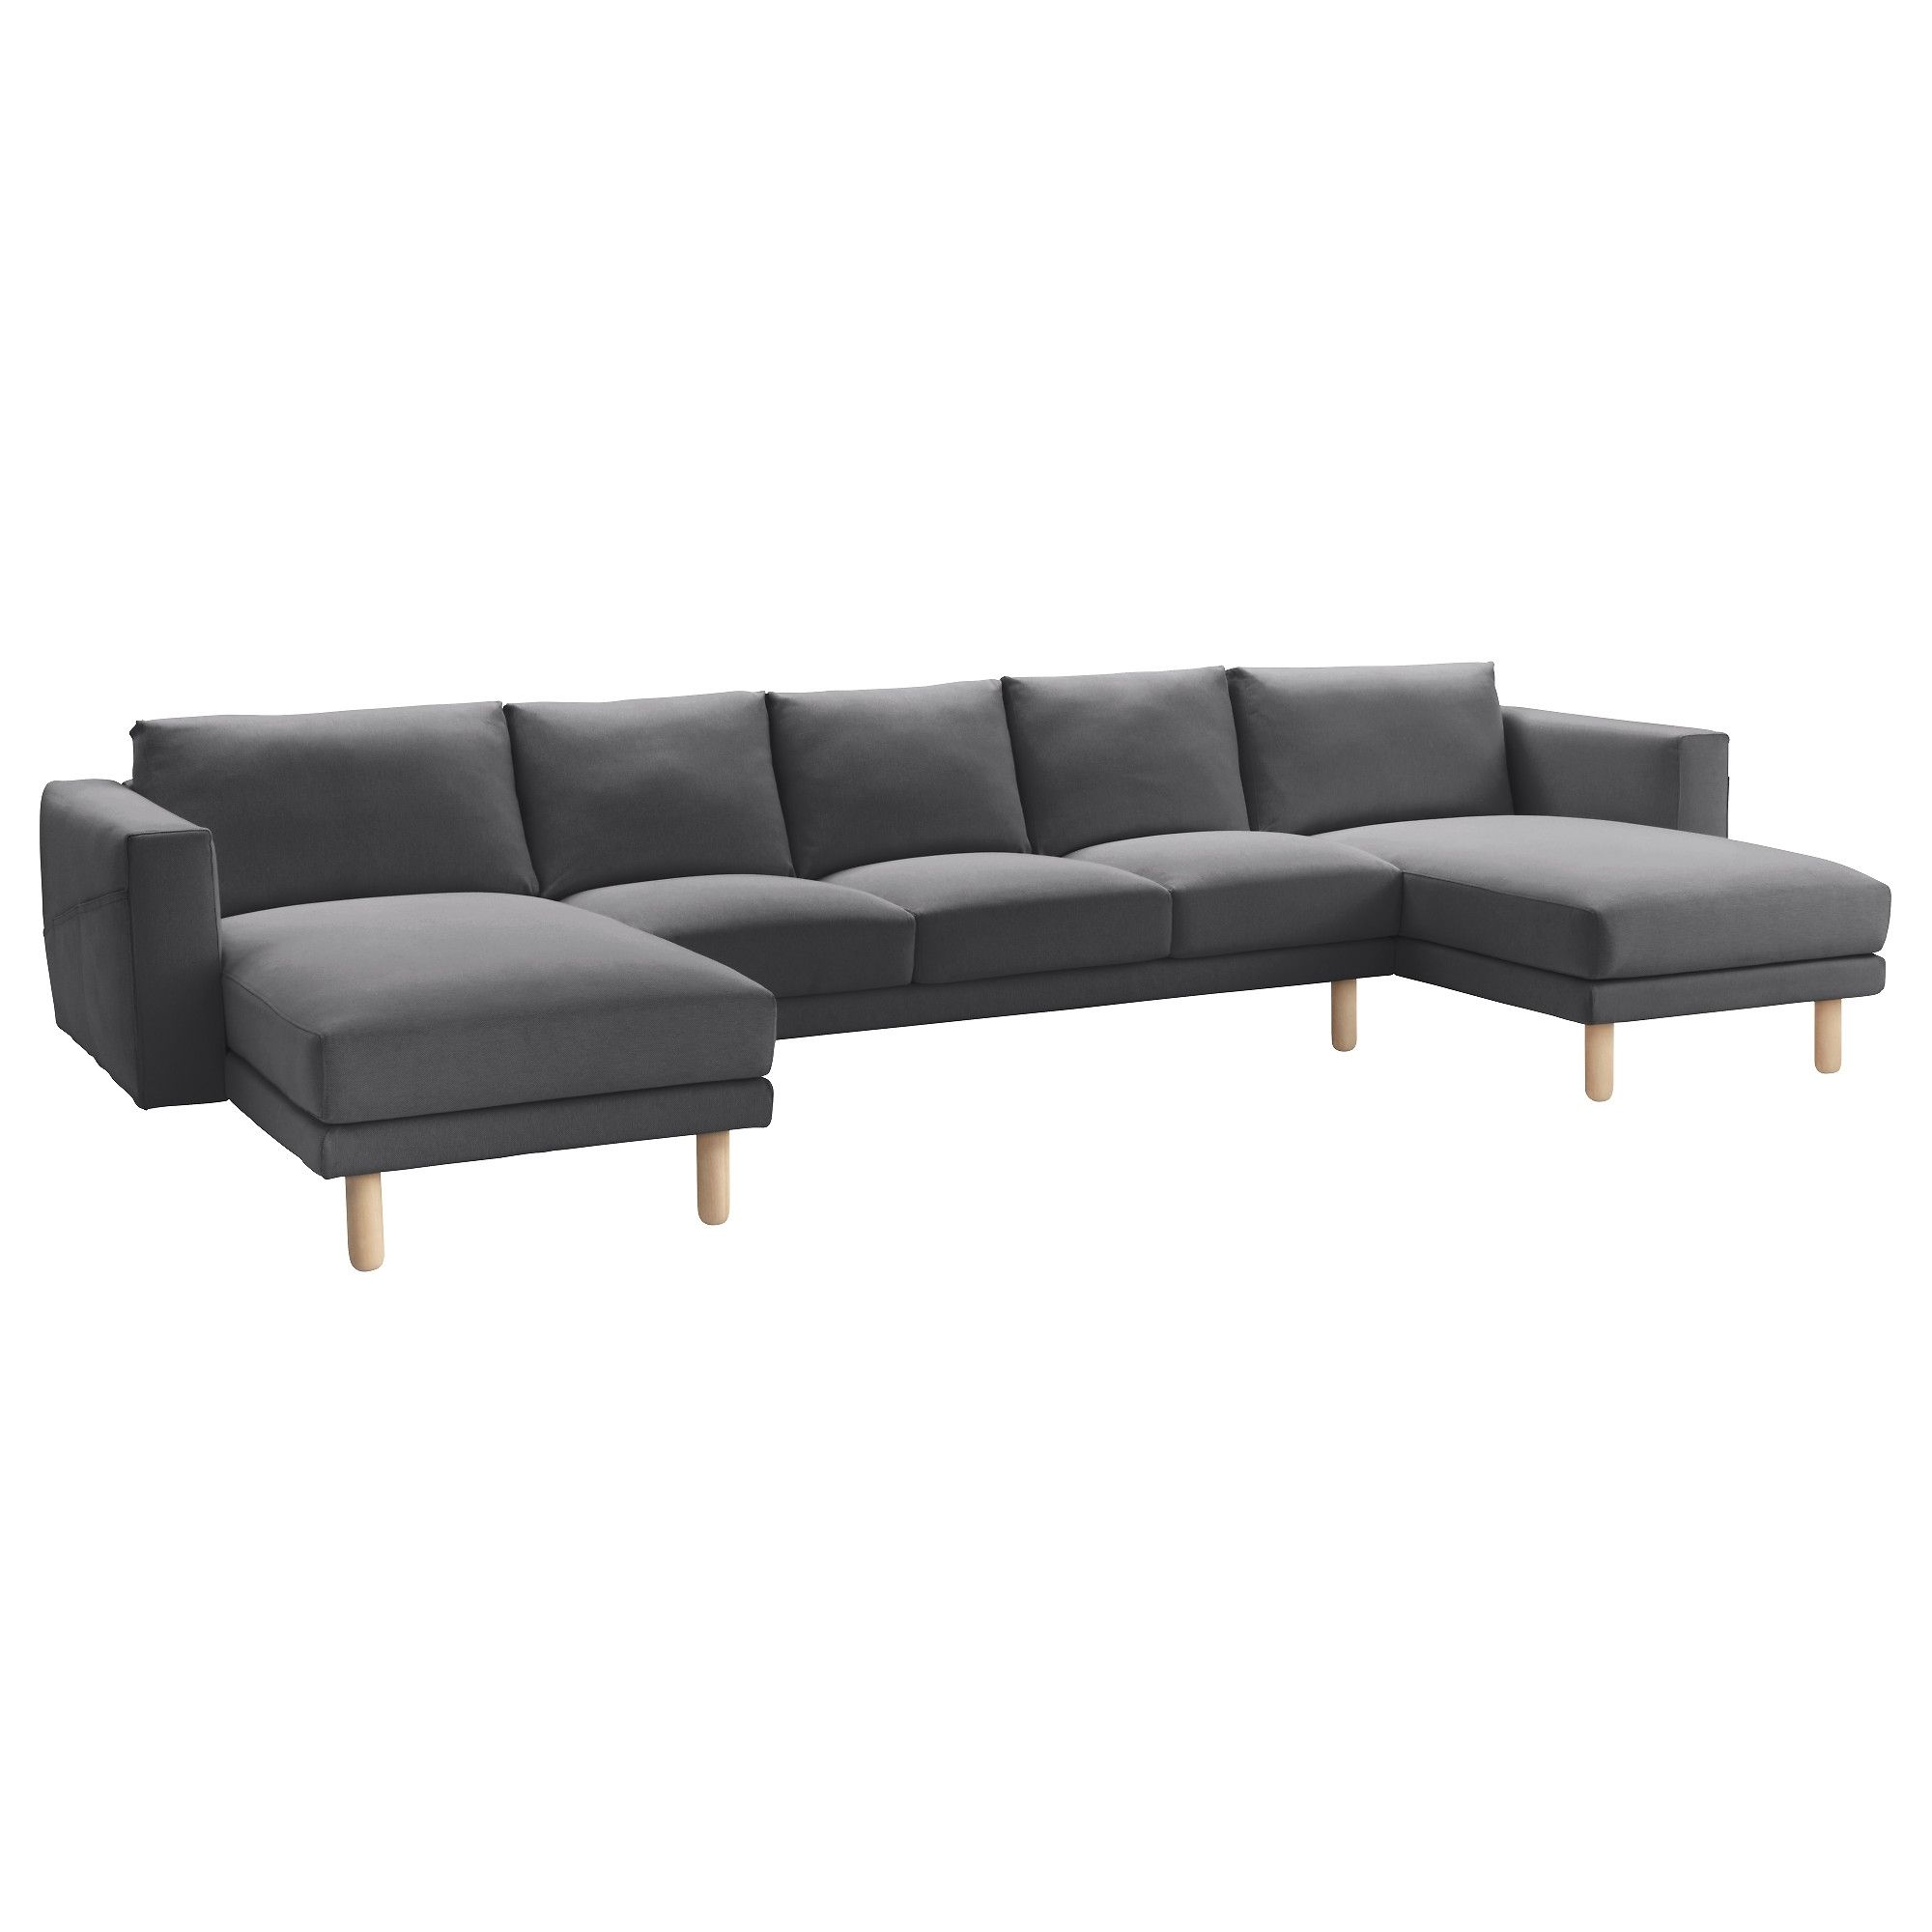 Famous Norsborg Sectional, 5 Seat – Finnsta Dark Gray – Ikea For Sectional Sofas With 2 Chaises (View 17 of 20)